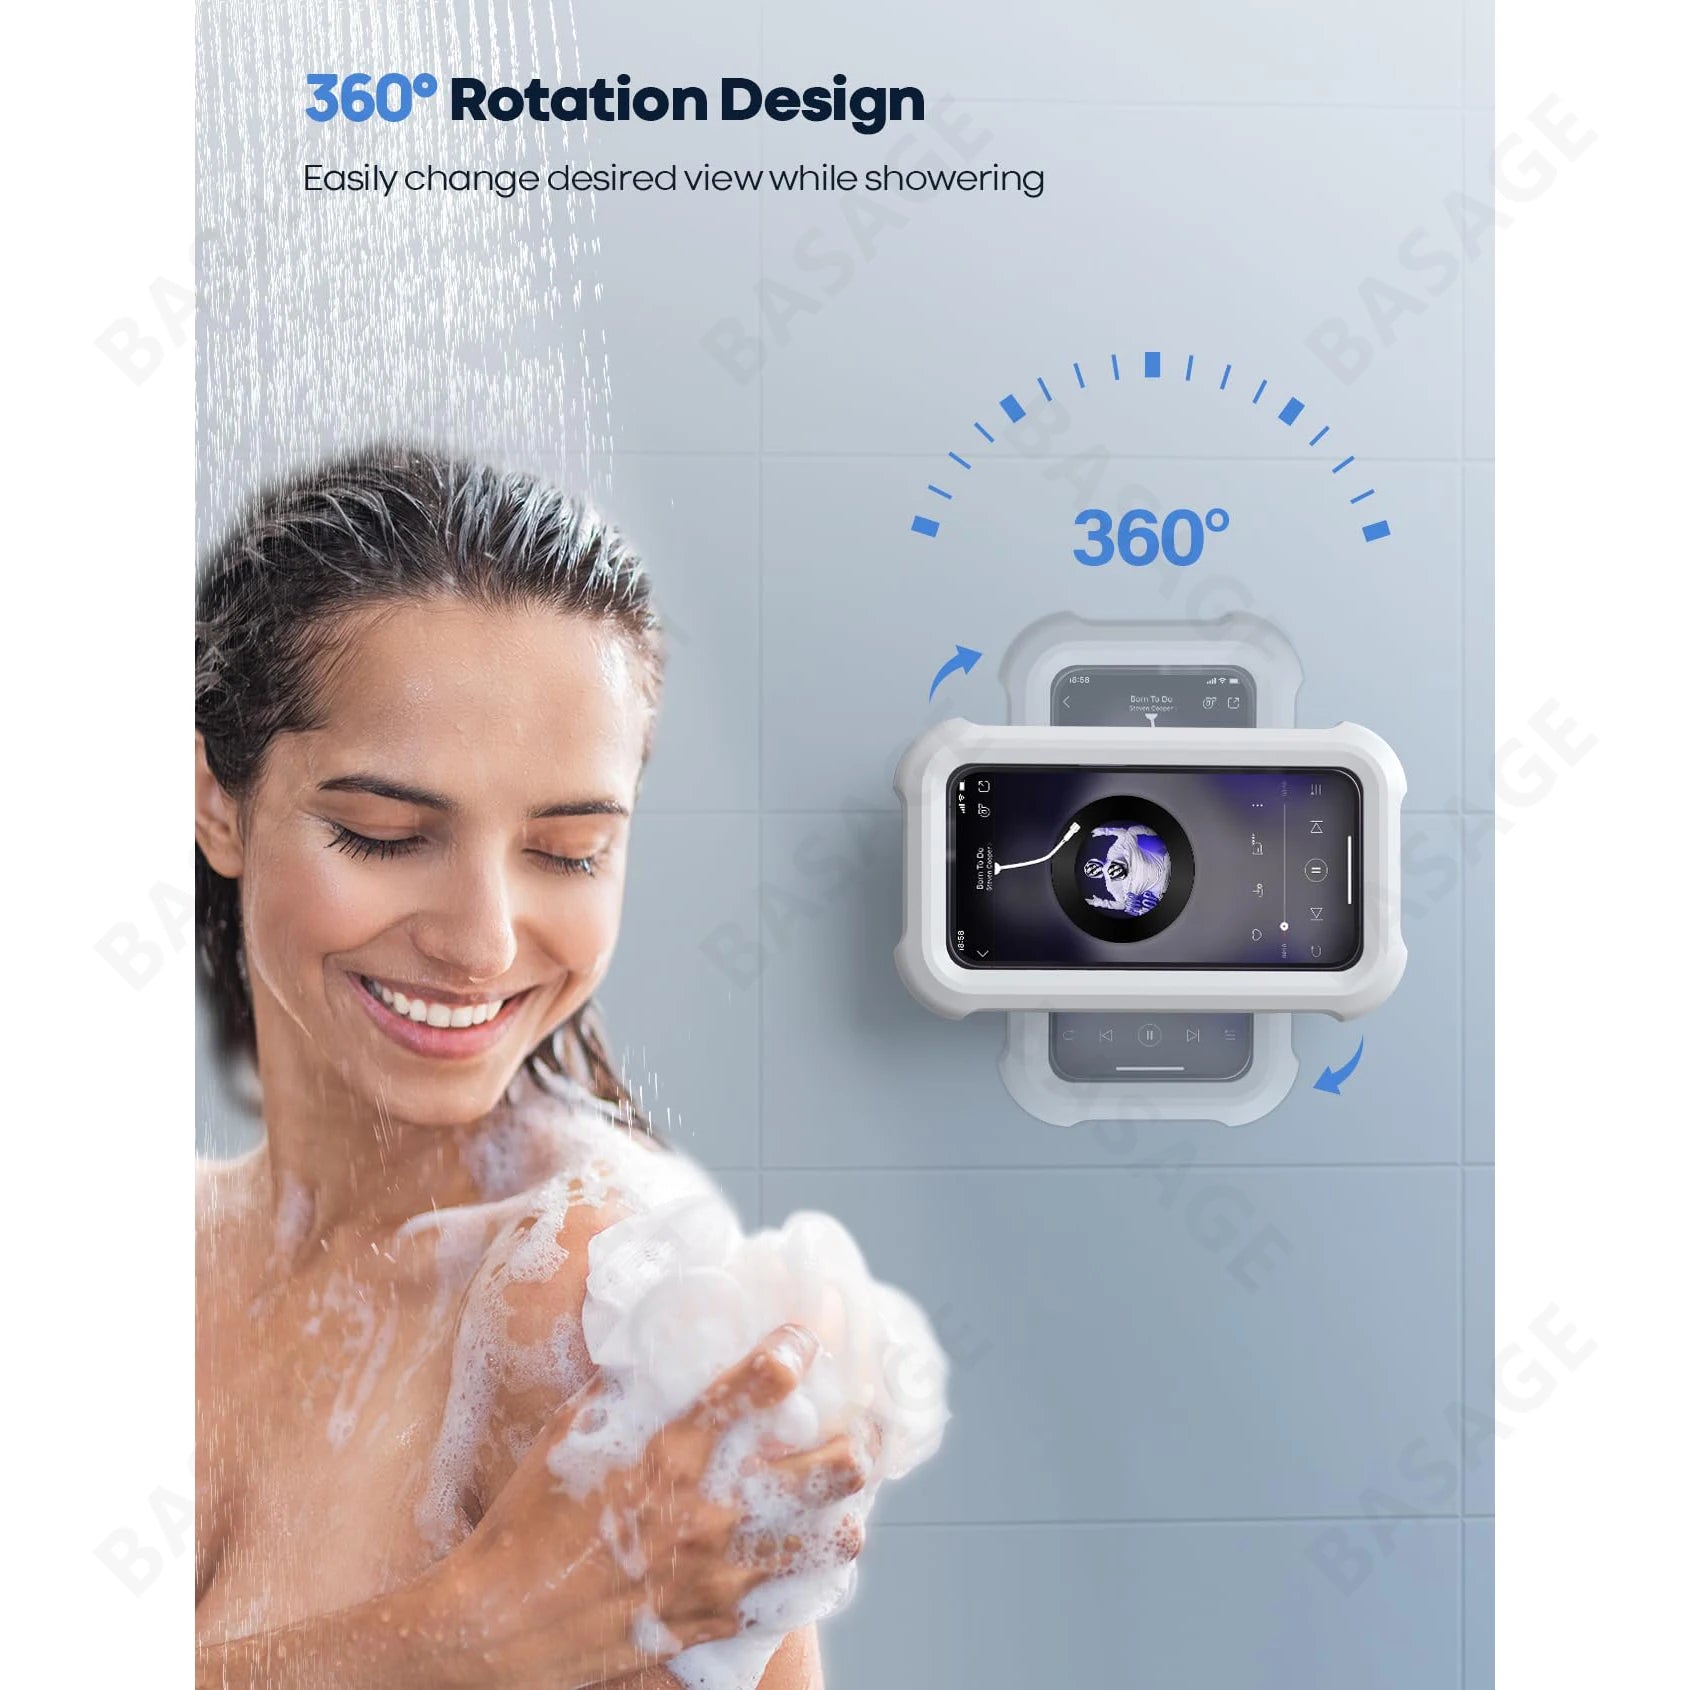 Waterproof Shower Phone Holder with 480° Rotation, Angle Adjustable, Wall Mounted Phone Holder for Bathroom Kitchen, Up to 6.8 Inch Phone